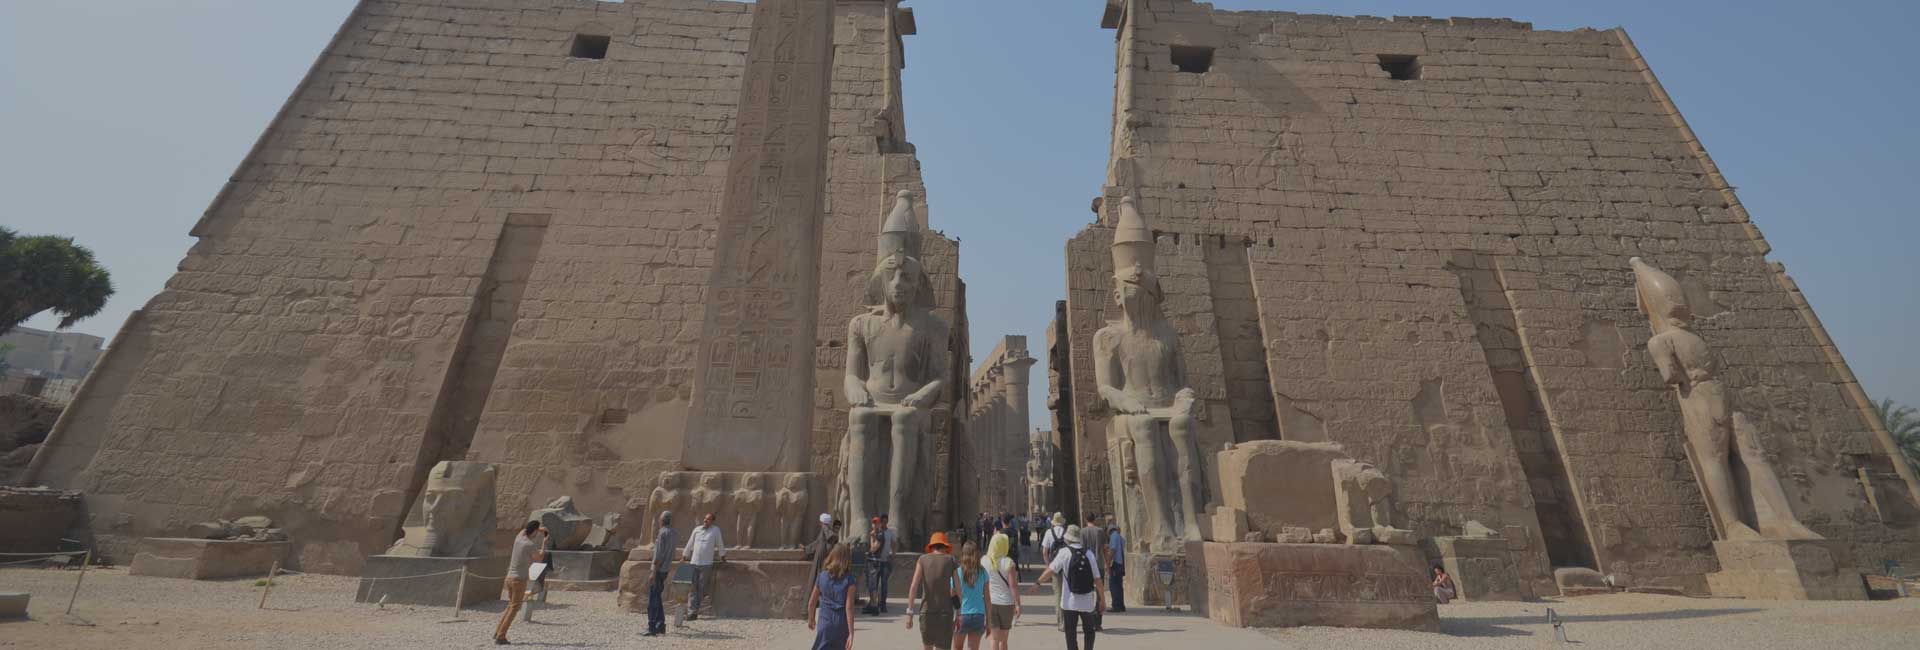 Temple Of Luxor